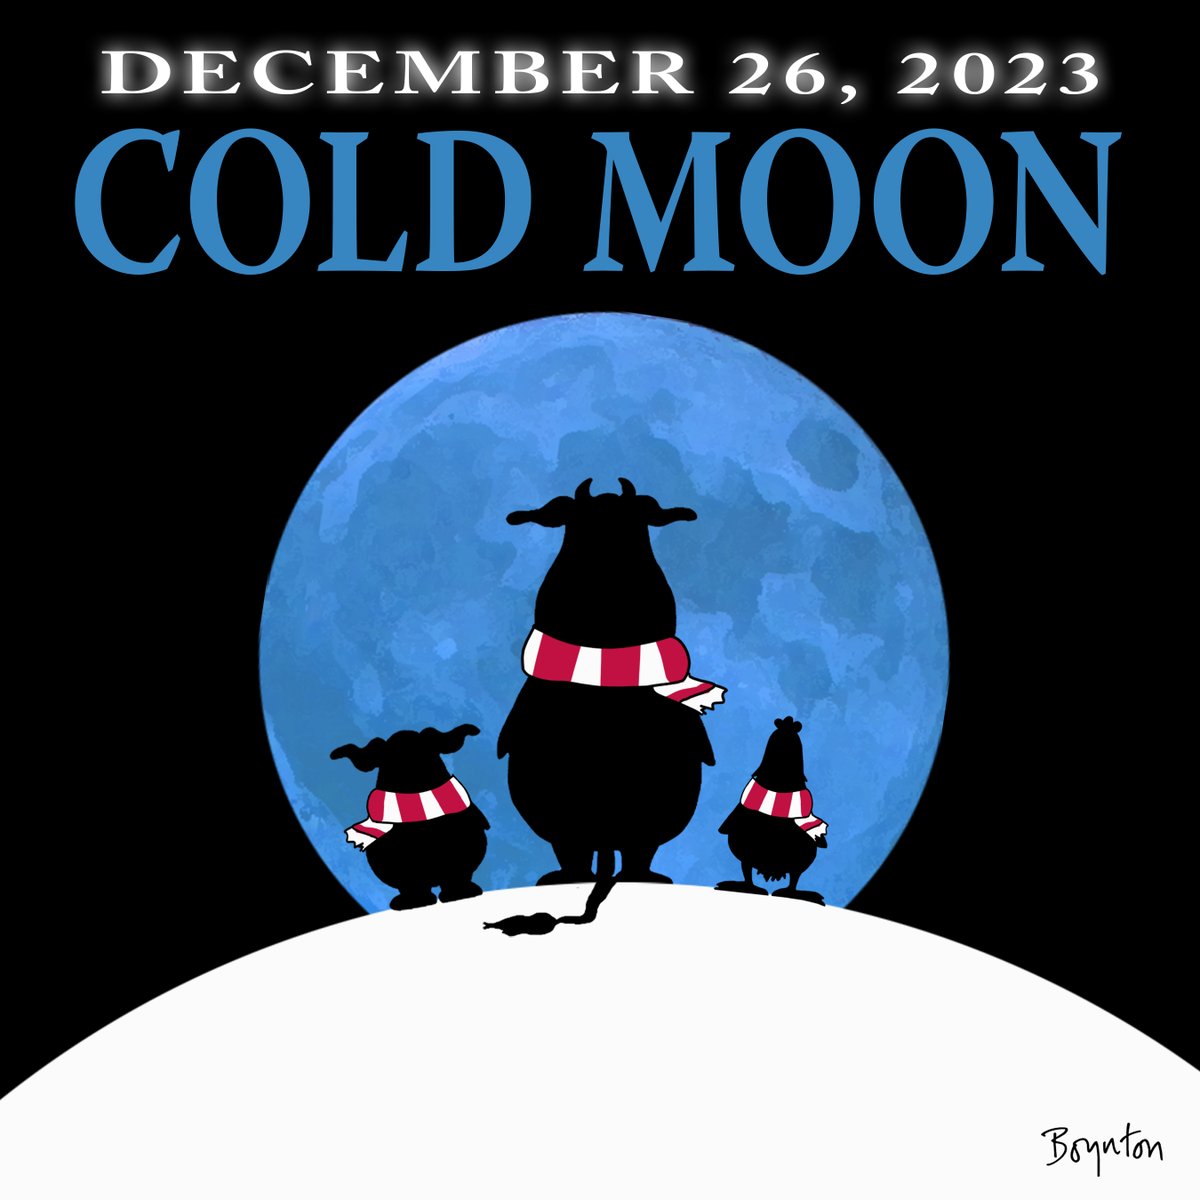 Full Moon rising tonight. Find some warm friends to watch with. #ColdMoon